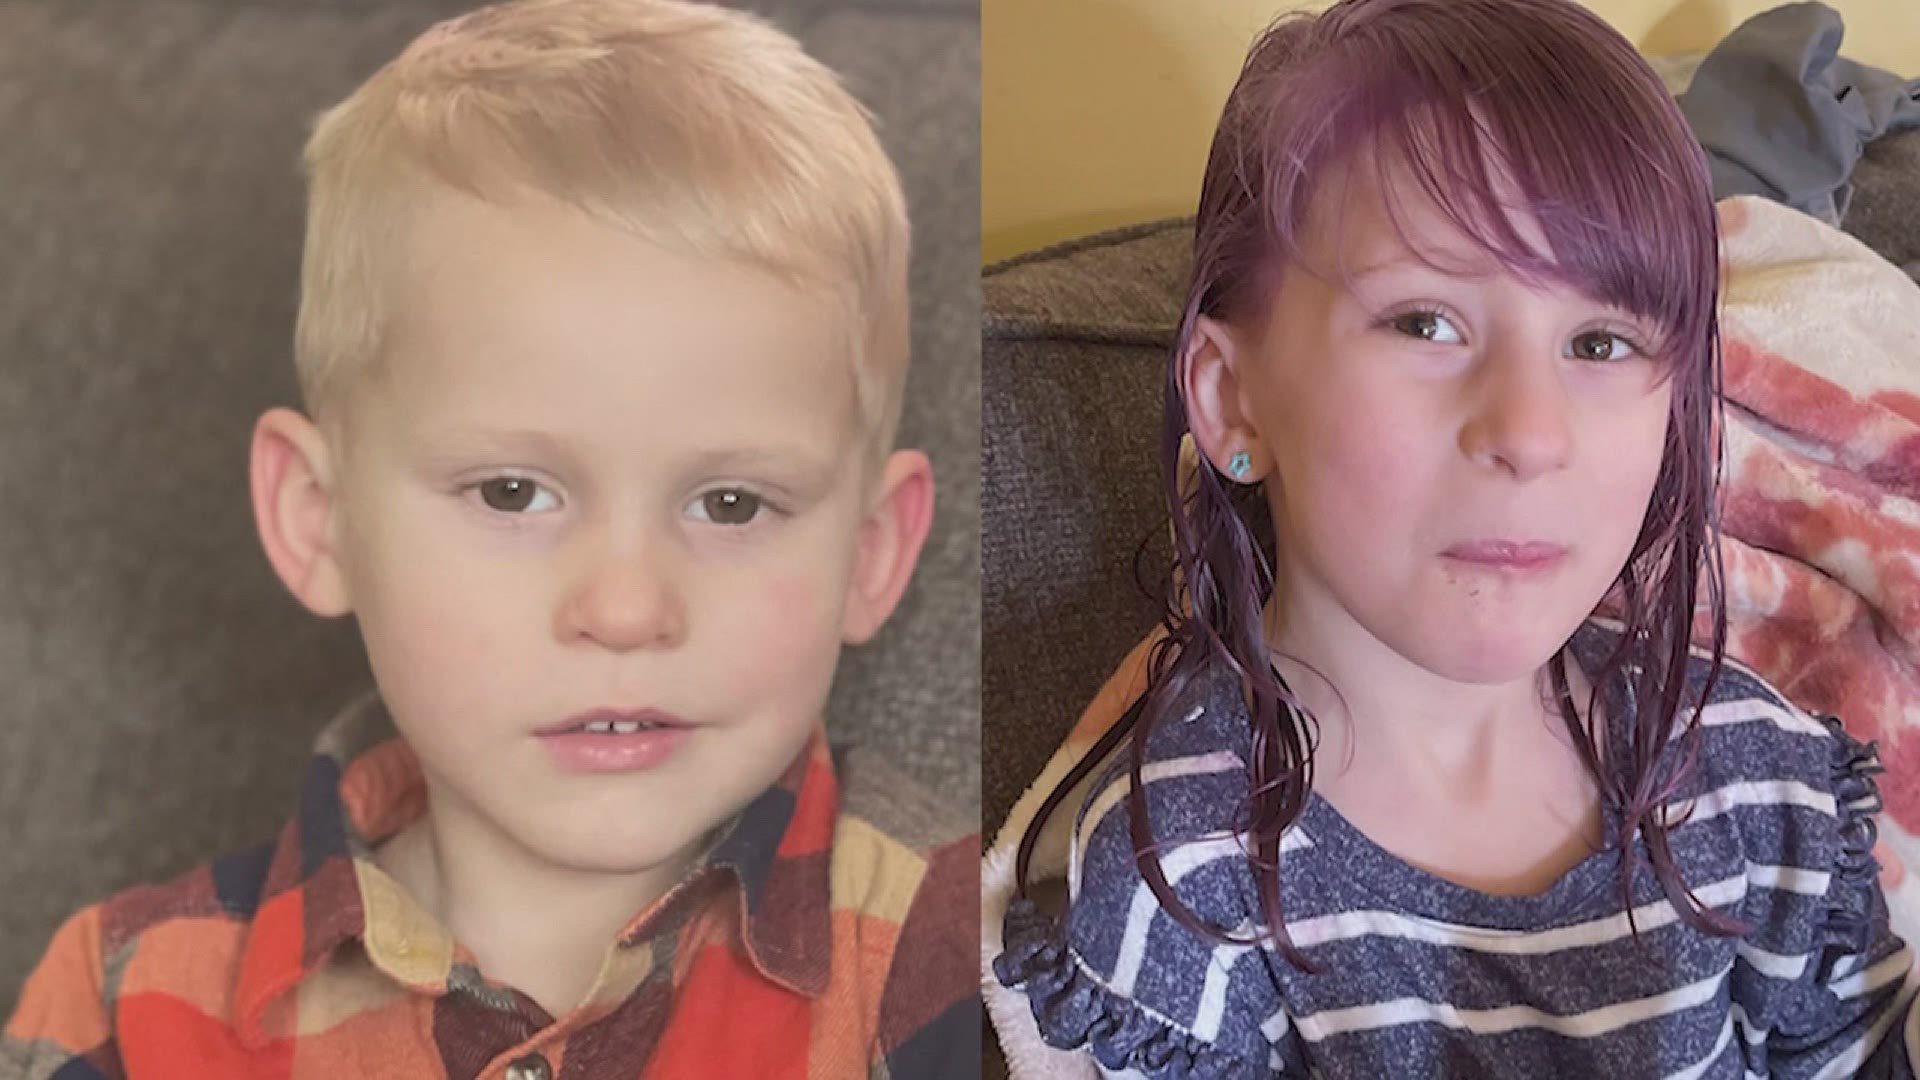 A Rock Falls mom is grieving the deaths of her two children after they were found dead at their father's house.